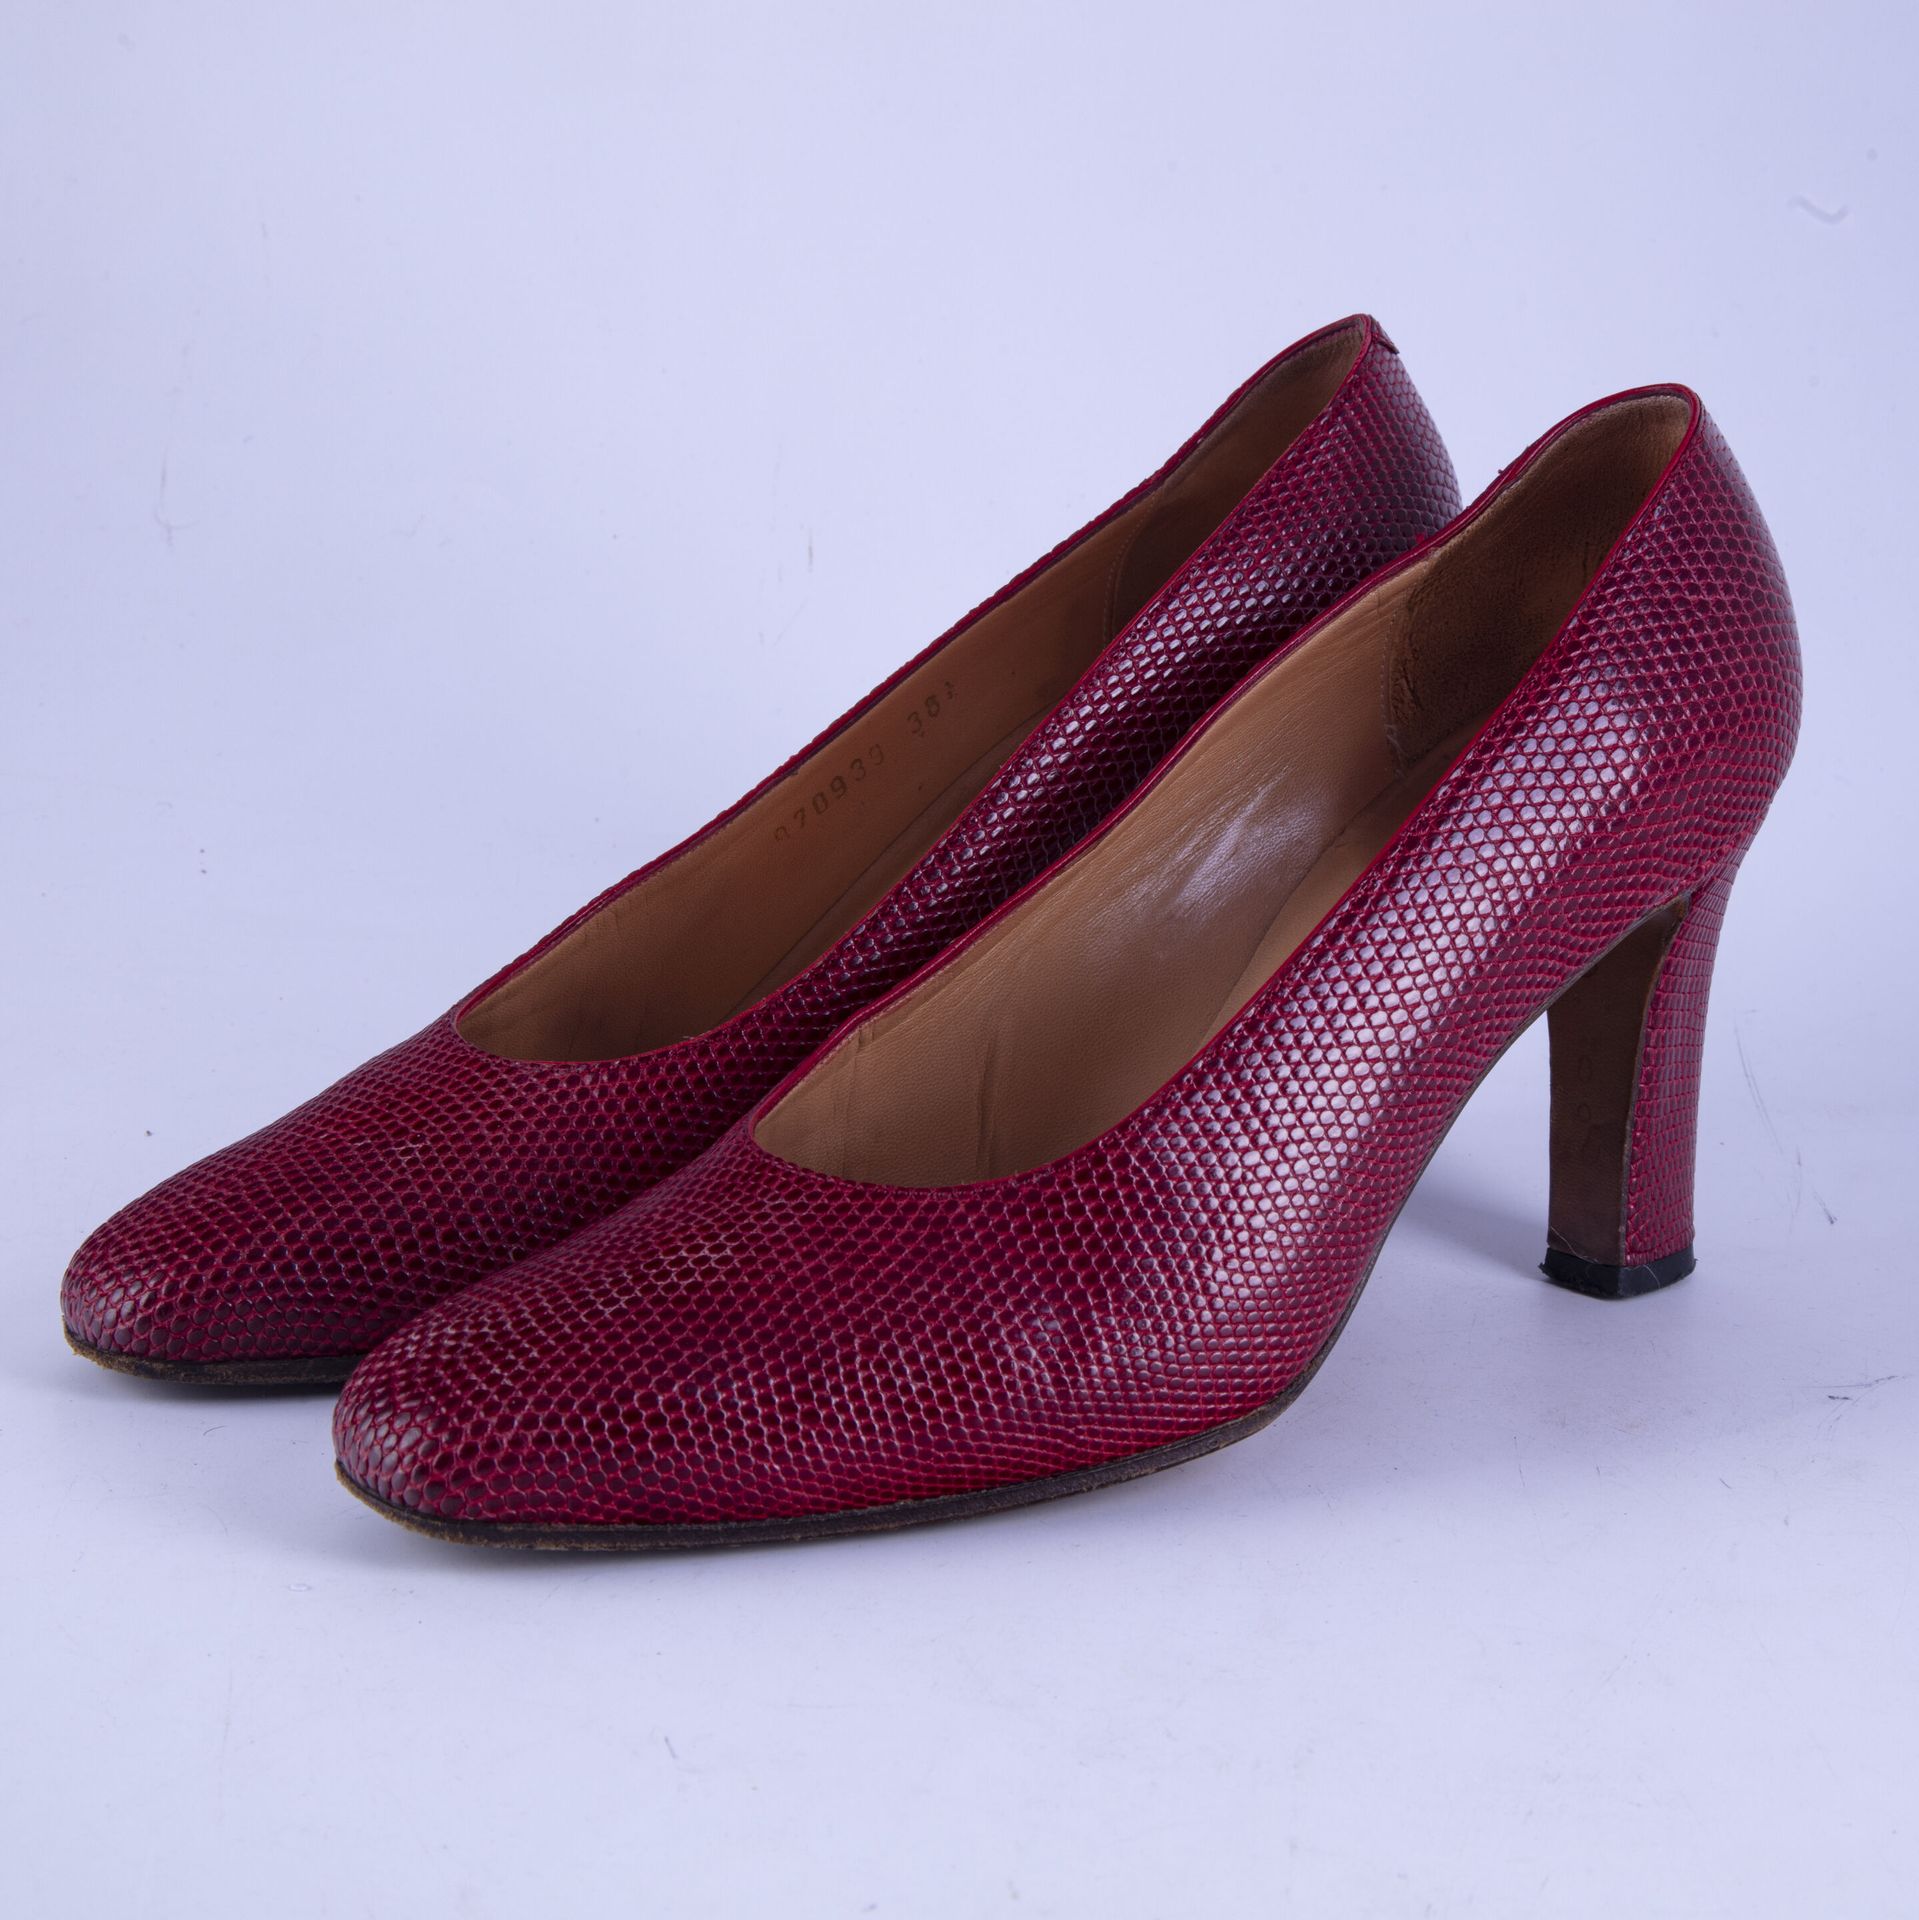 Null HAREL - Paris 
Pair of red leather pumps. 
Size 38 1/2
Little wear